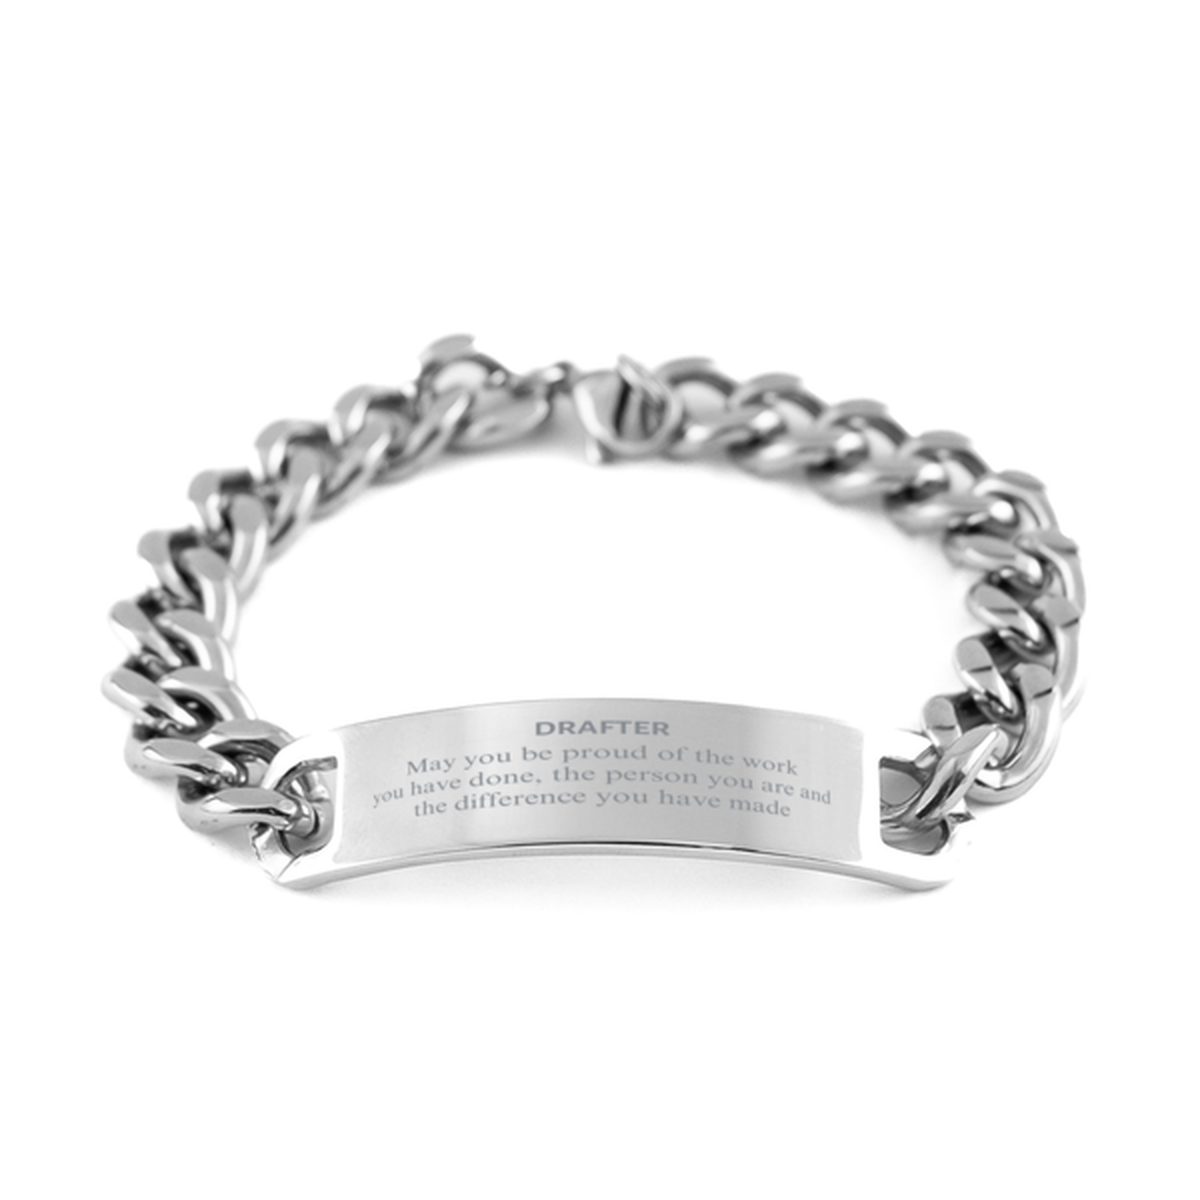 Drafter May you be proud of the work you have done, Retirement Drafter Cuban Chain Stainless Steel Bracelet for Colleague Appreciation Gifts Amazing for Drafter